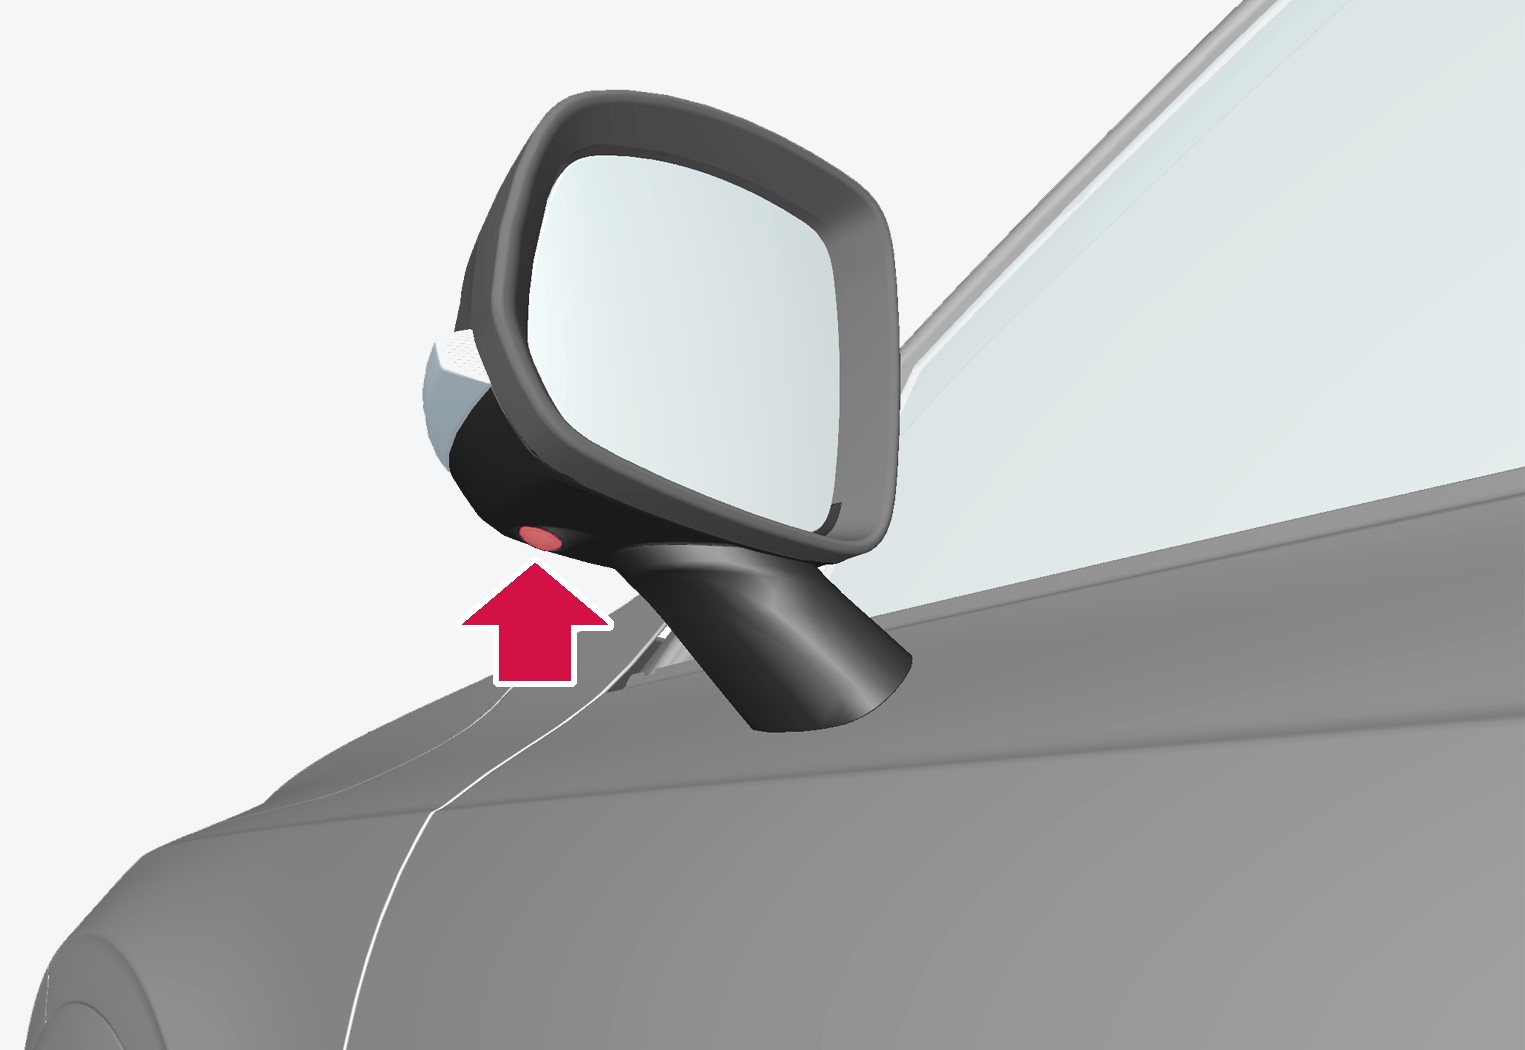 The side cameras are positioned in each door mirror.